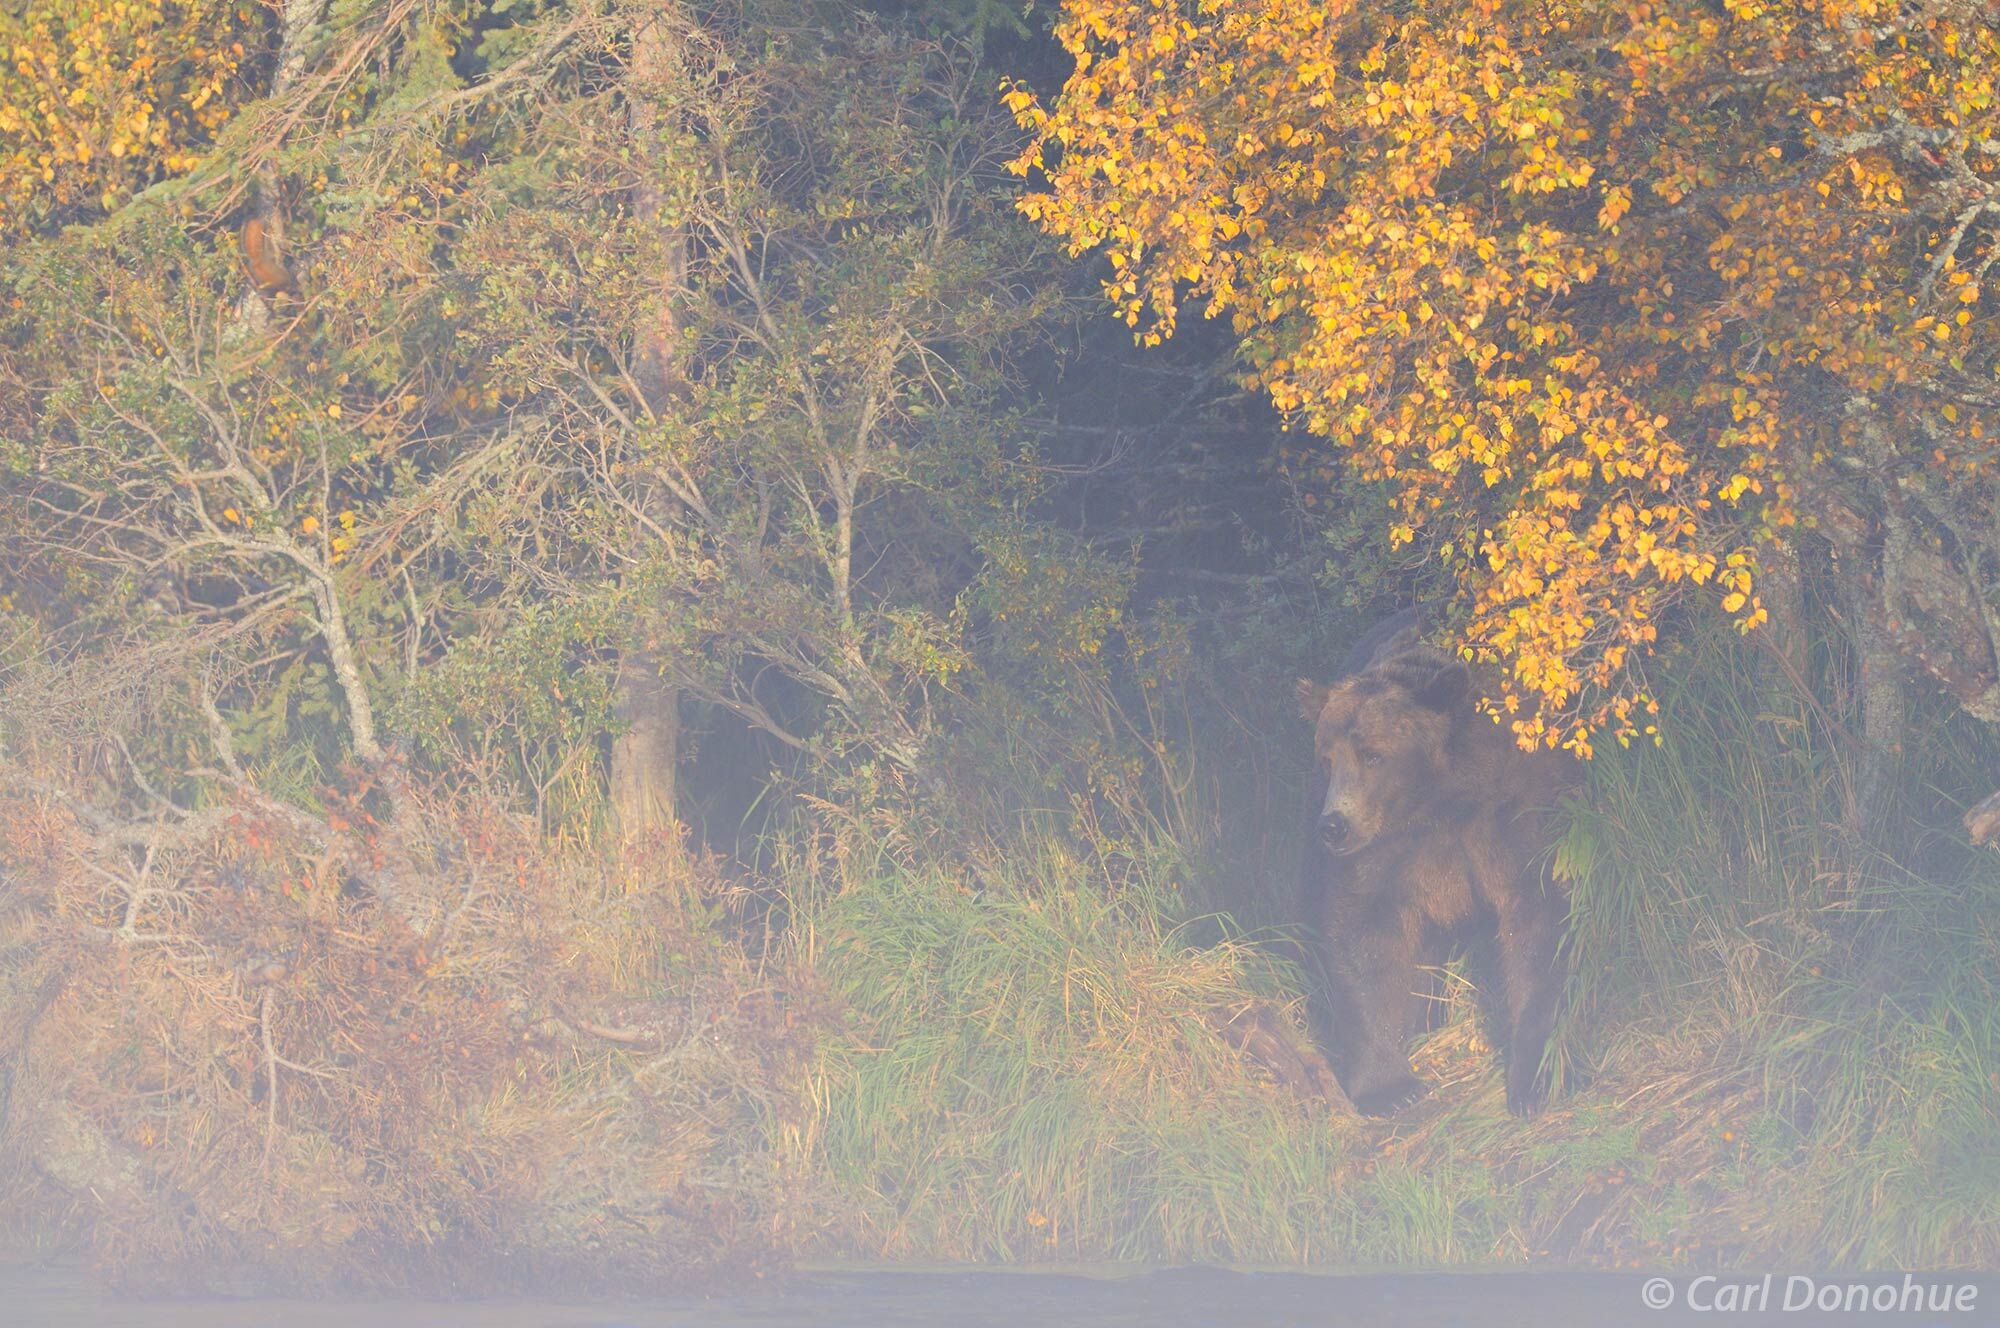 Brown bear, Ursus arctos, standing under a poplar tree, fall color and crisp early morning fog, on a cold fall morning. Brown...